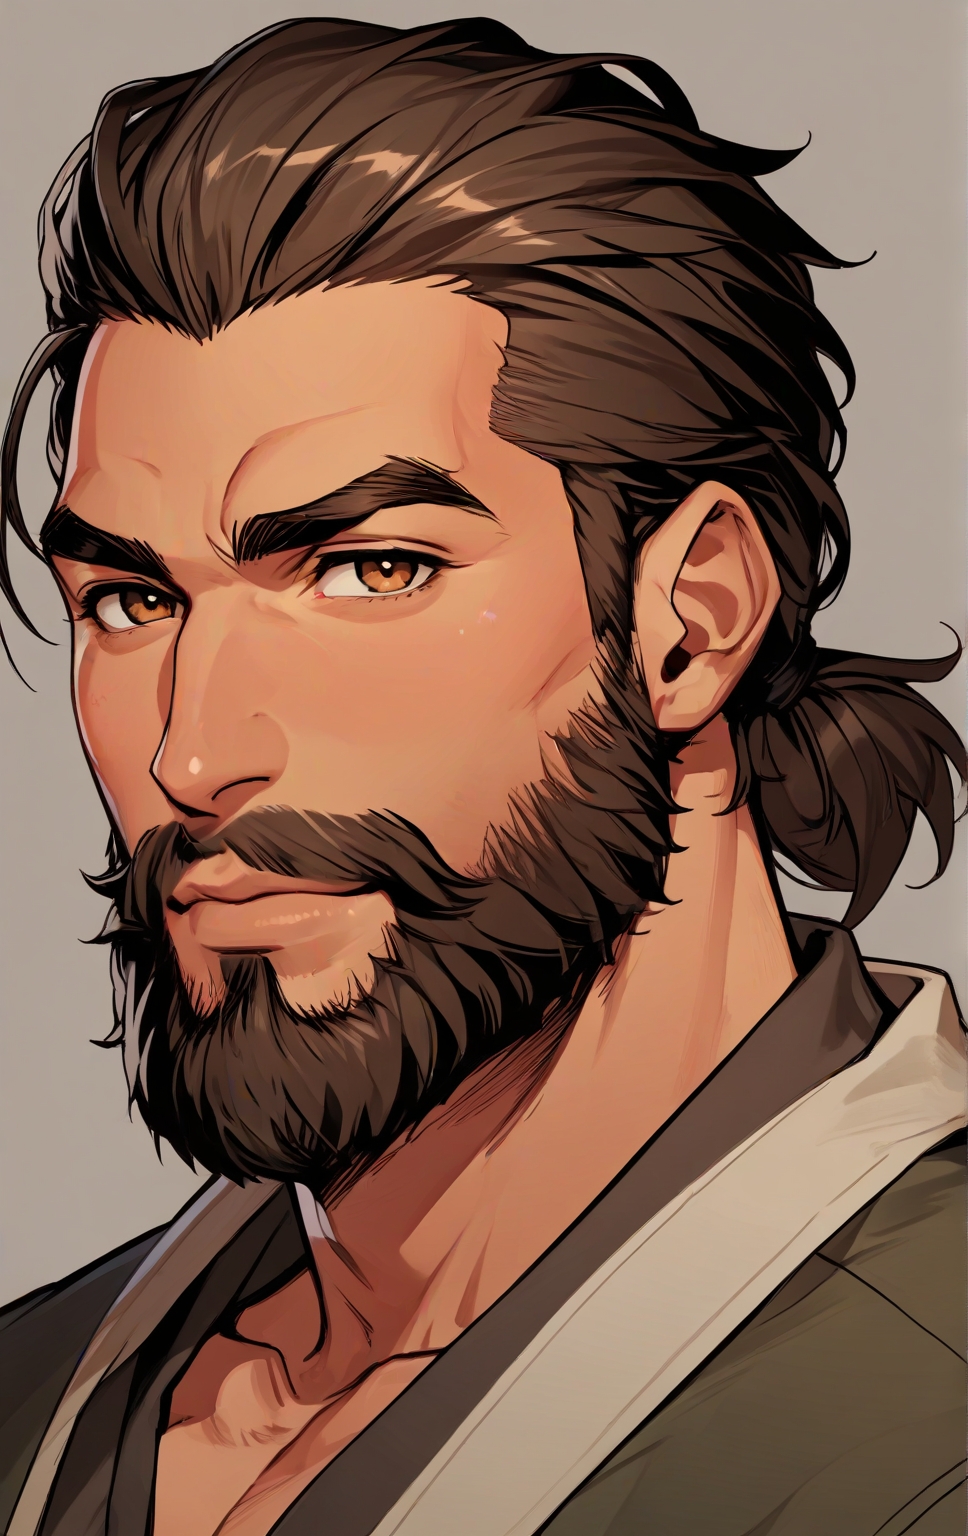 Default_A_man_with_a_tan_beard_with_brown_eyes_and_black_hair_0.jpg